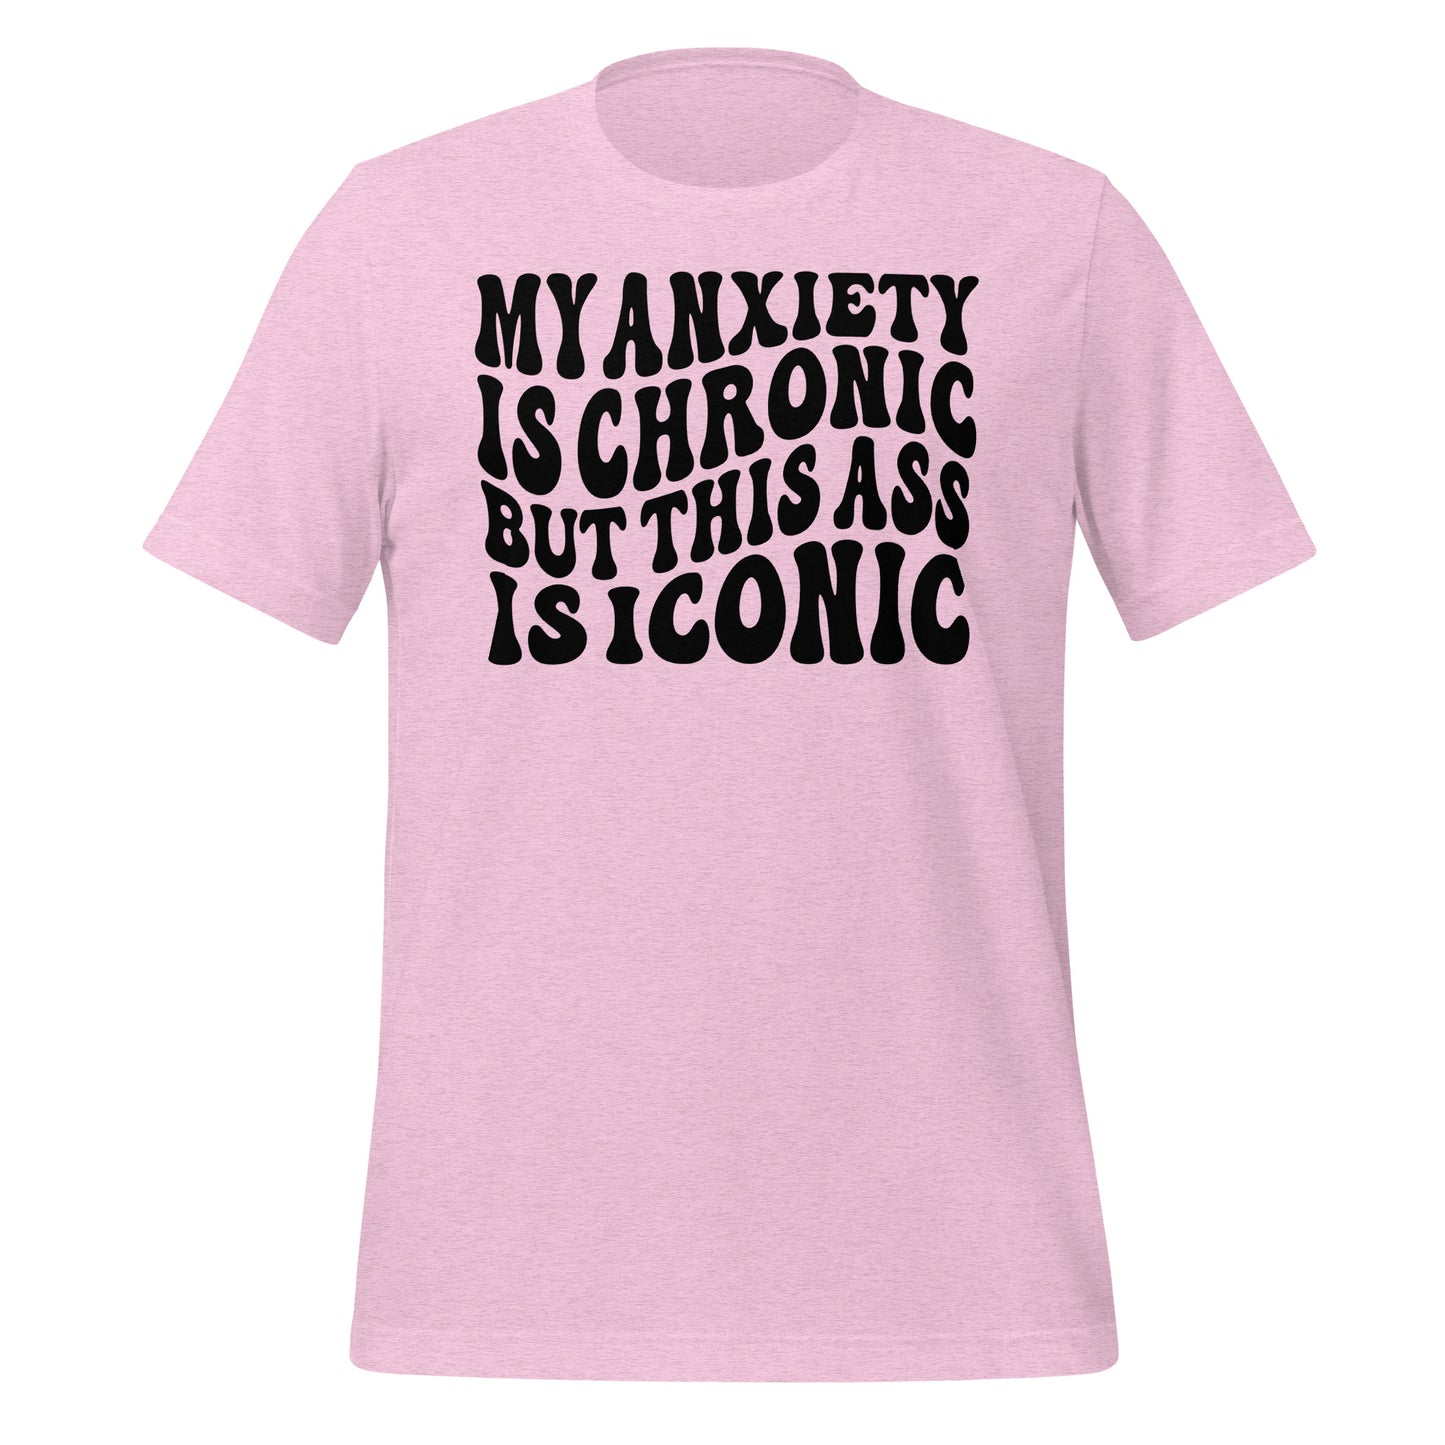 My Anxiety is Chronic but This Ass is Iconic Quality Cotton Bella Canvas Adult T-Shirt